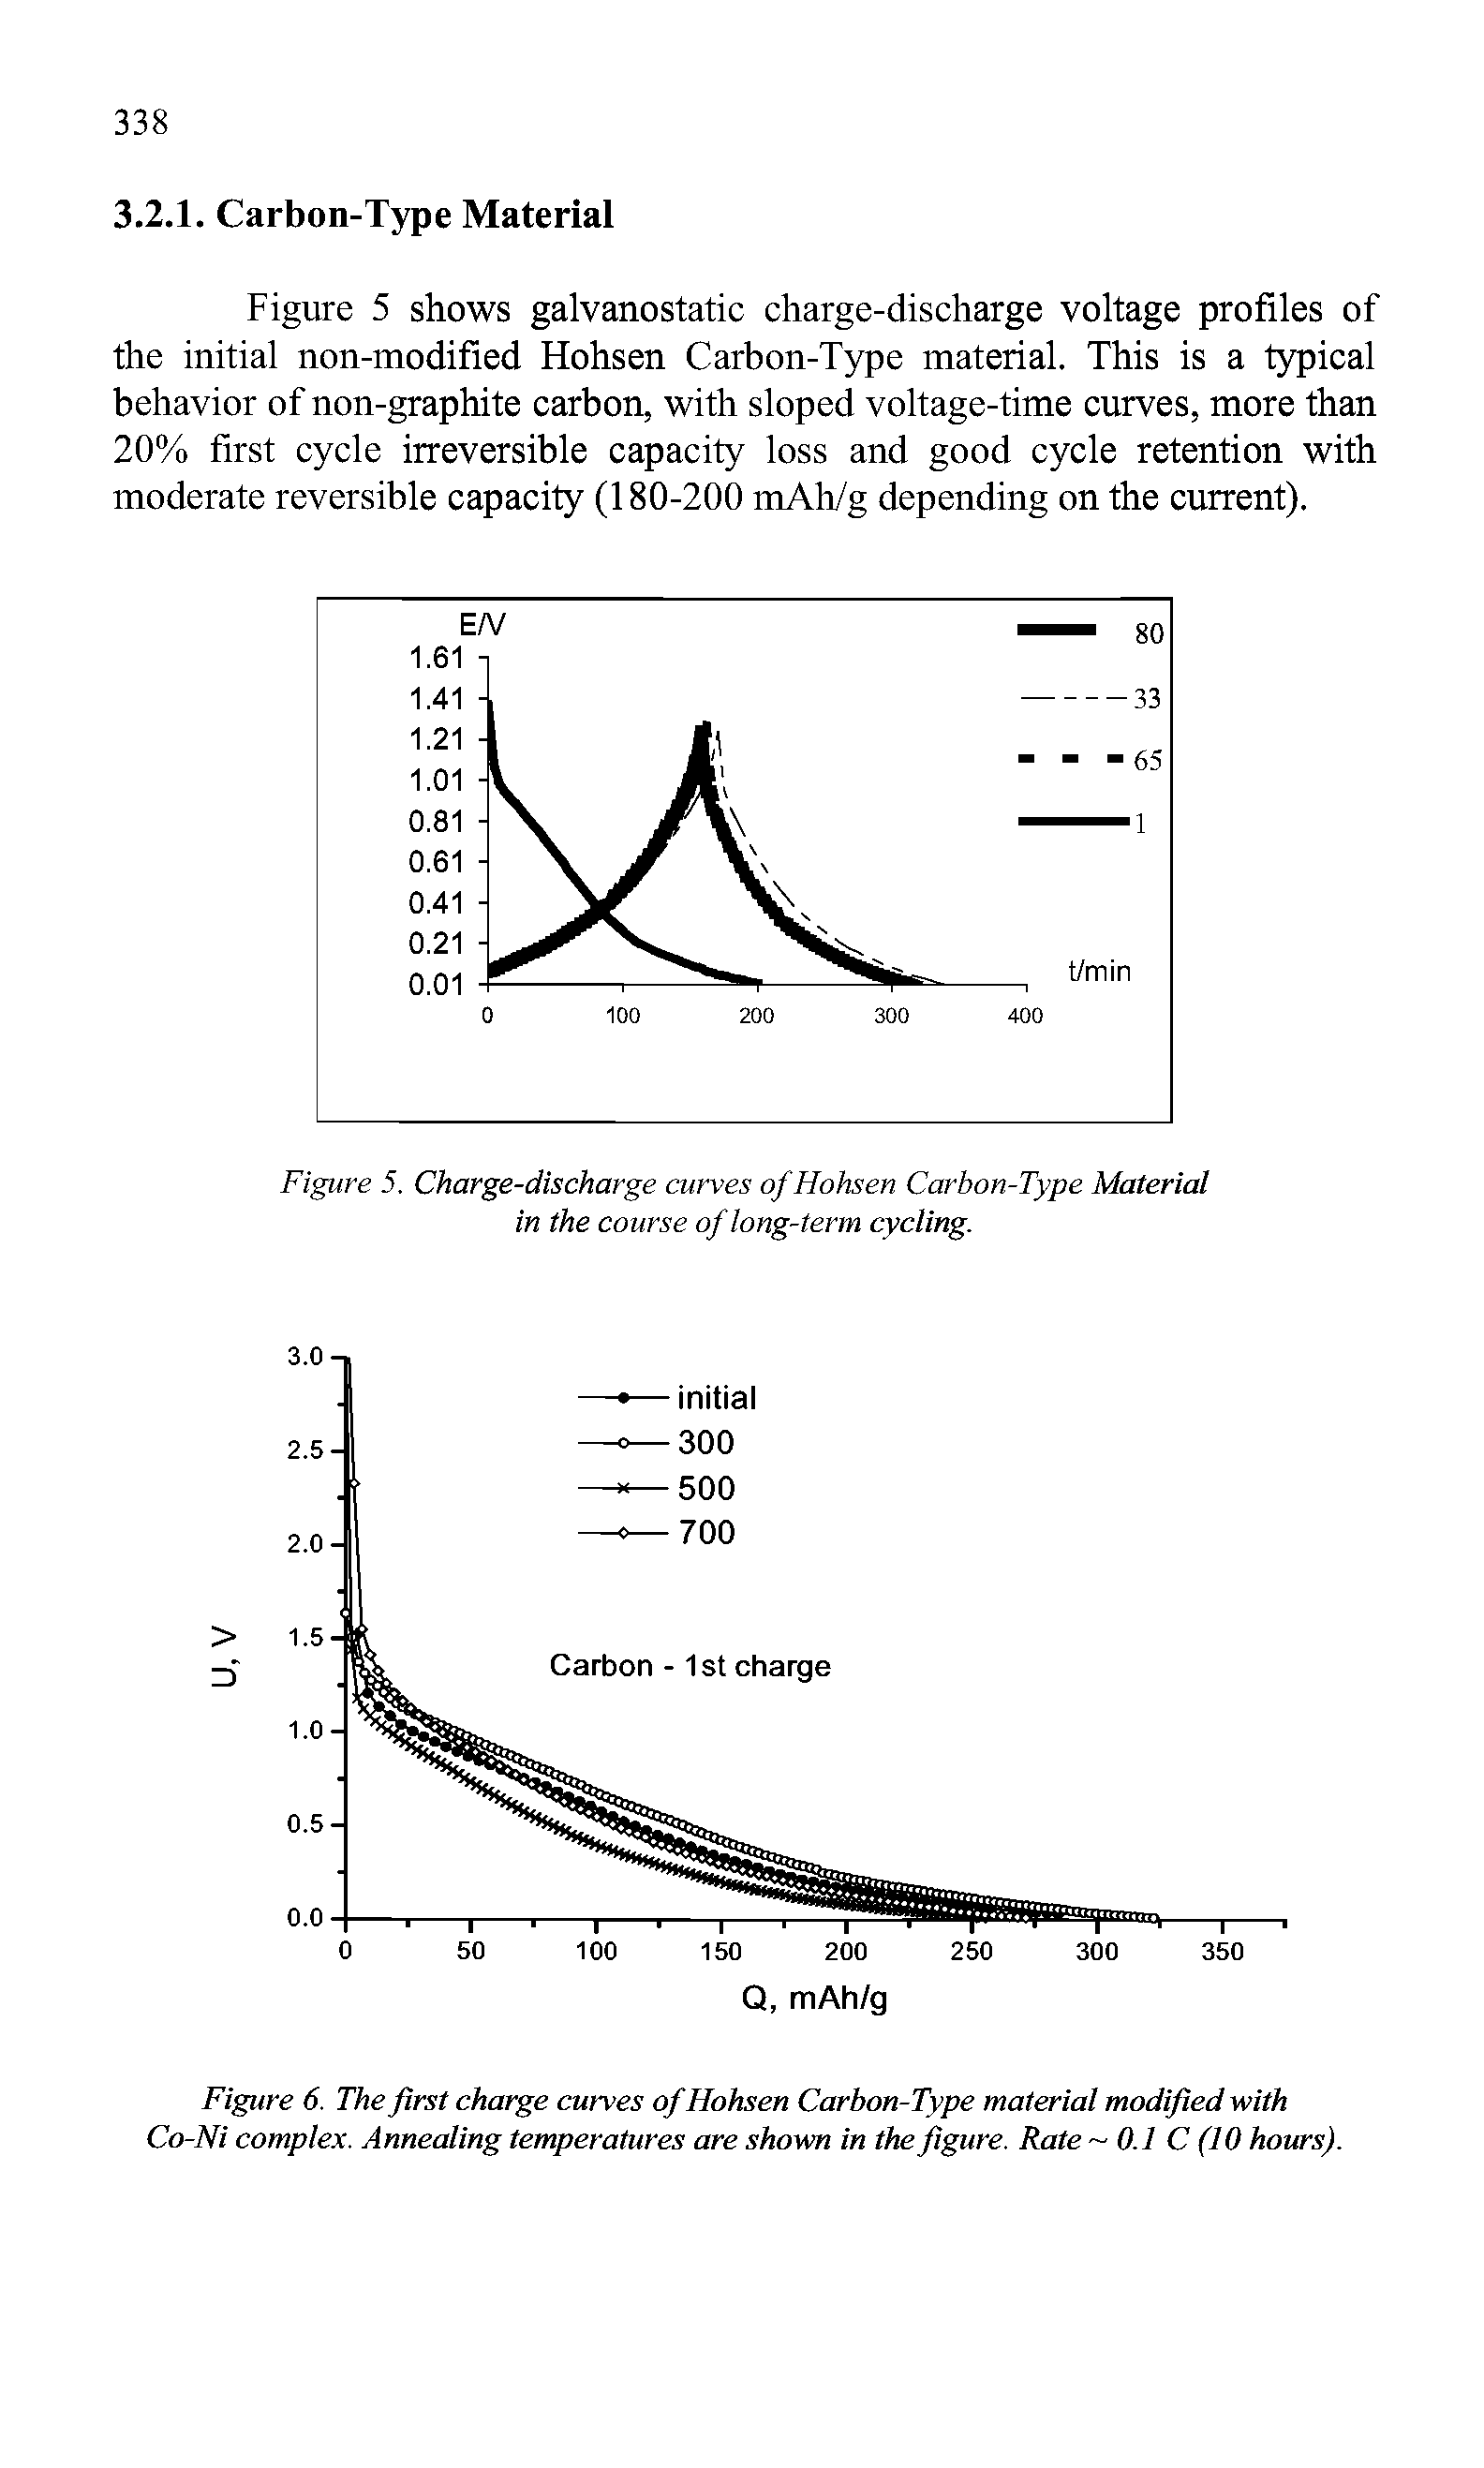 Figure 6. The first charge curves of Hohsen Carbon-Type material modified with Co-Ni complex. Annealing temperatures are shown in the figure. Rate 0.1 C (10 hours).